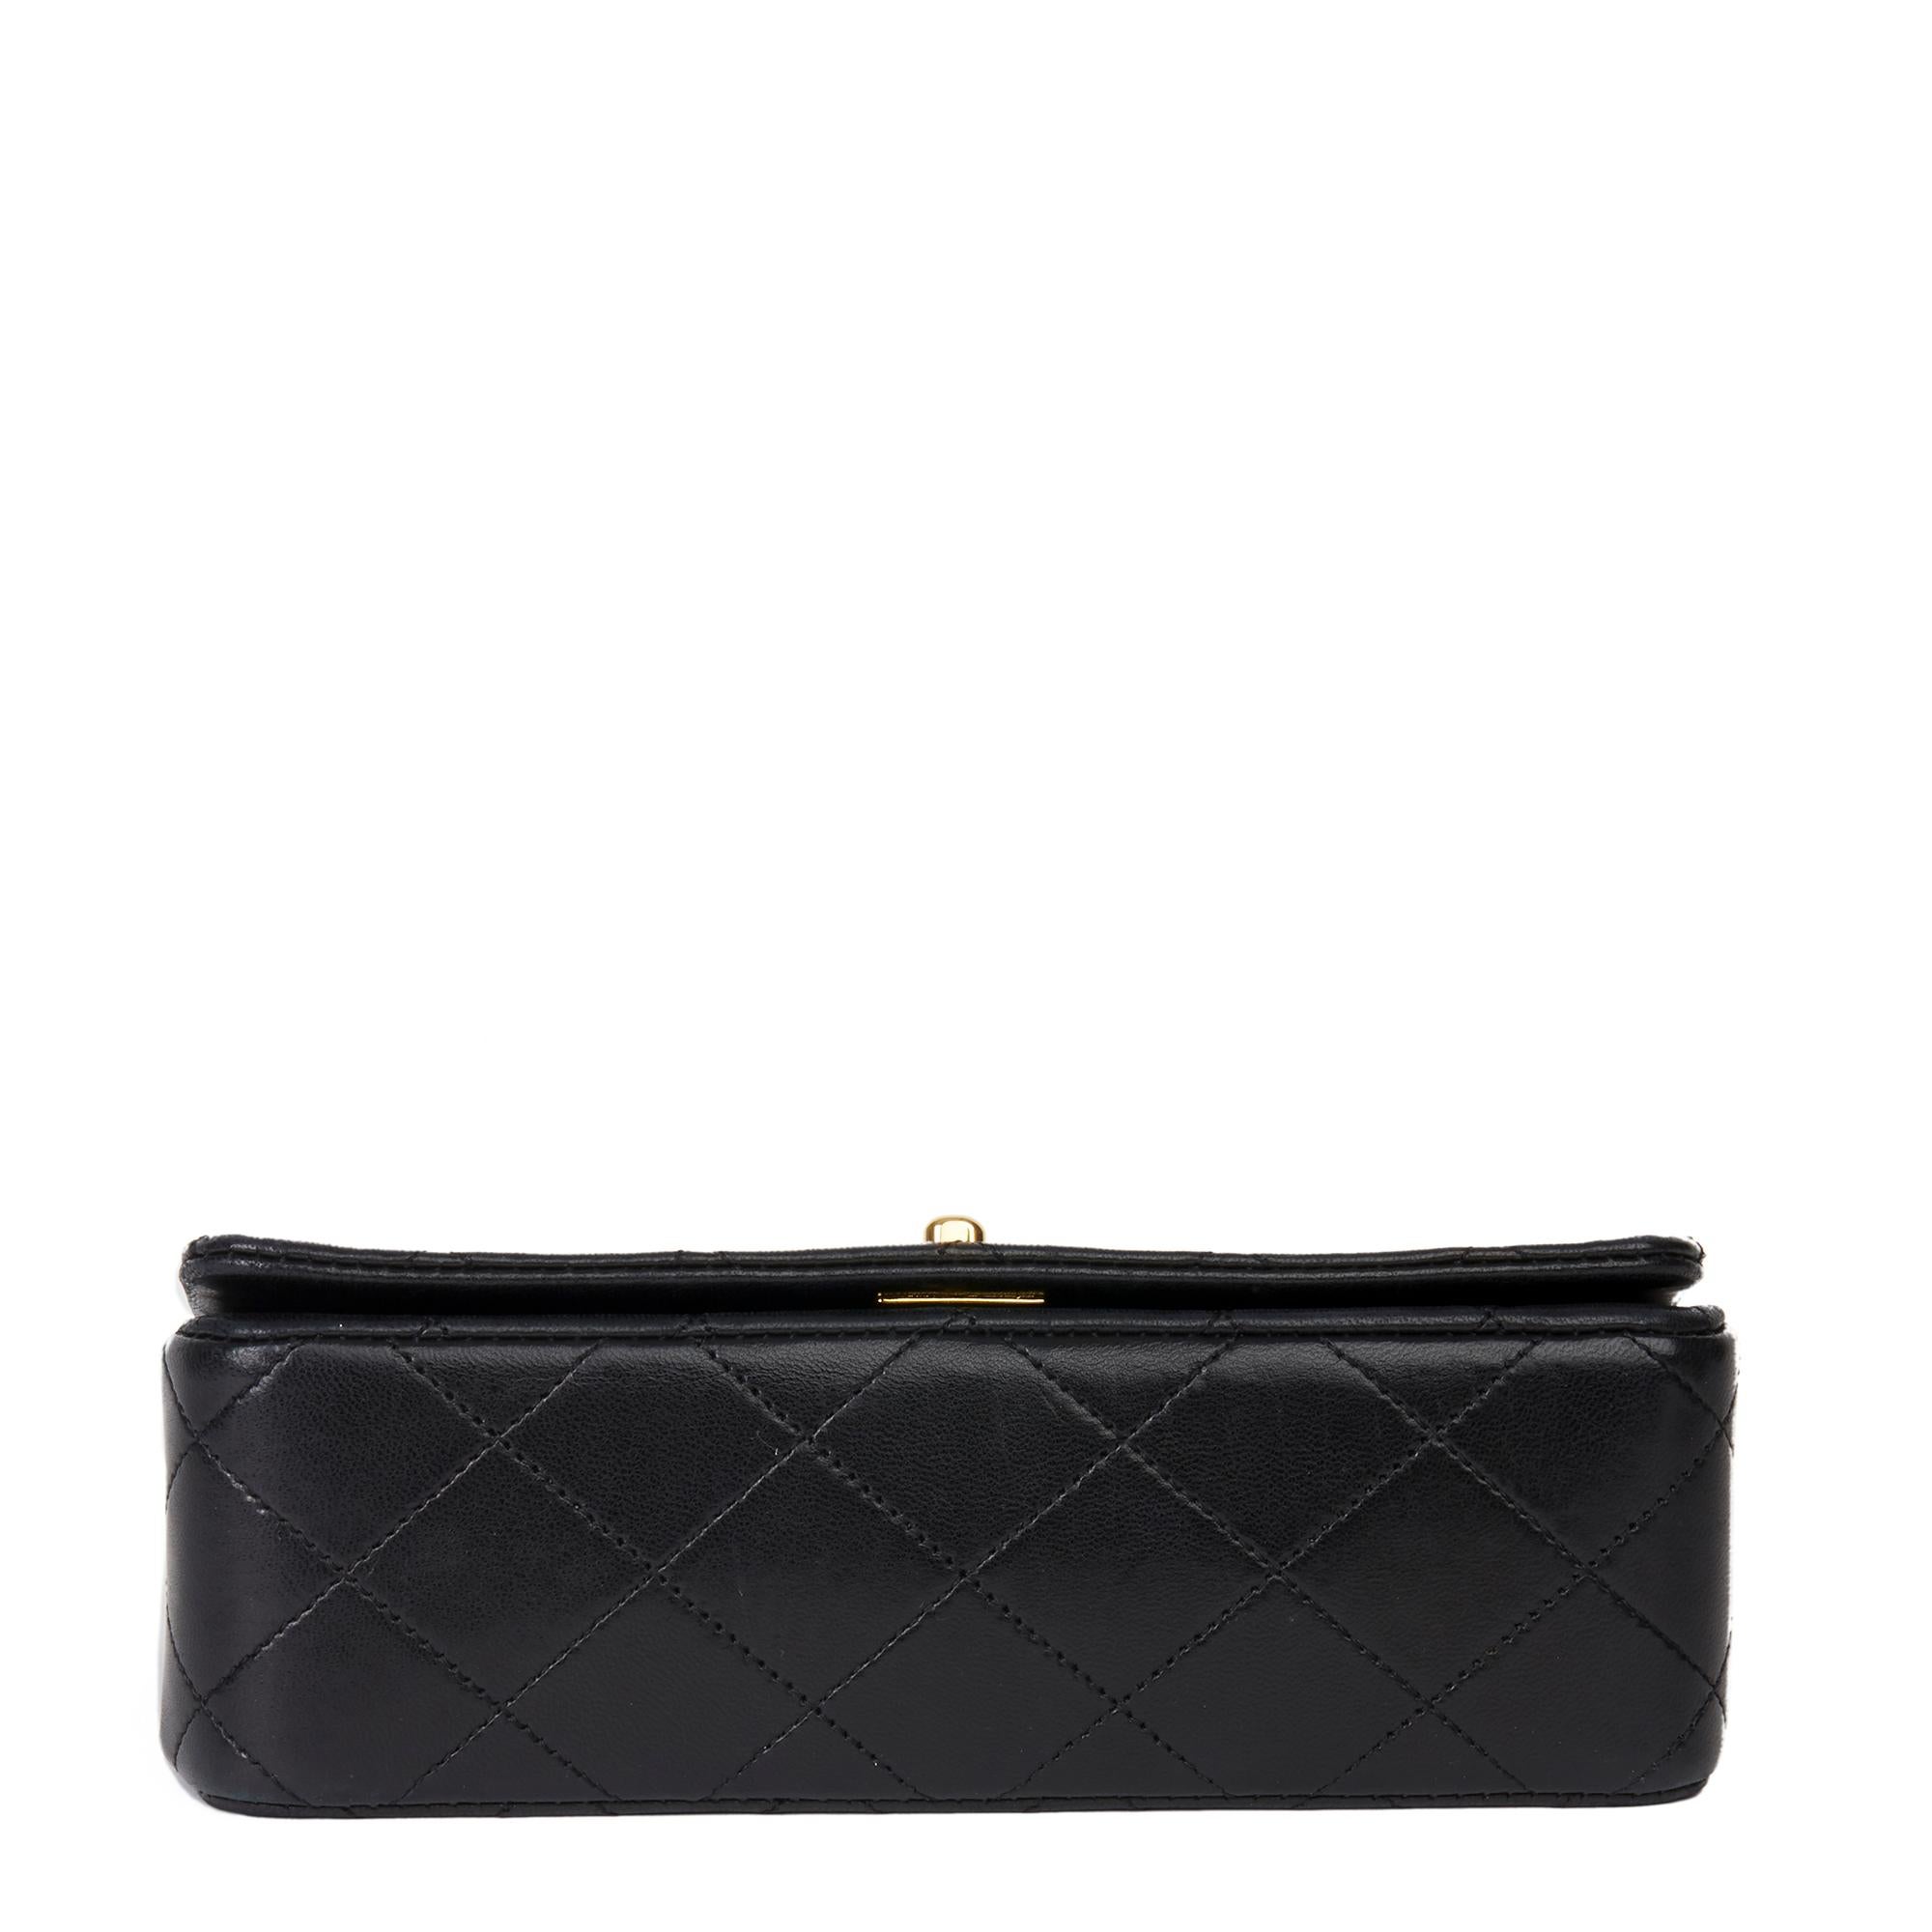 1991 Chanel Black Quilted Lambskin Vintage Mini Flap Bag  1